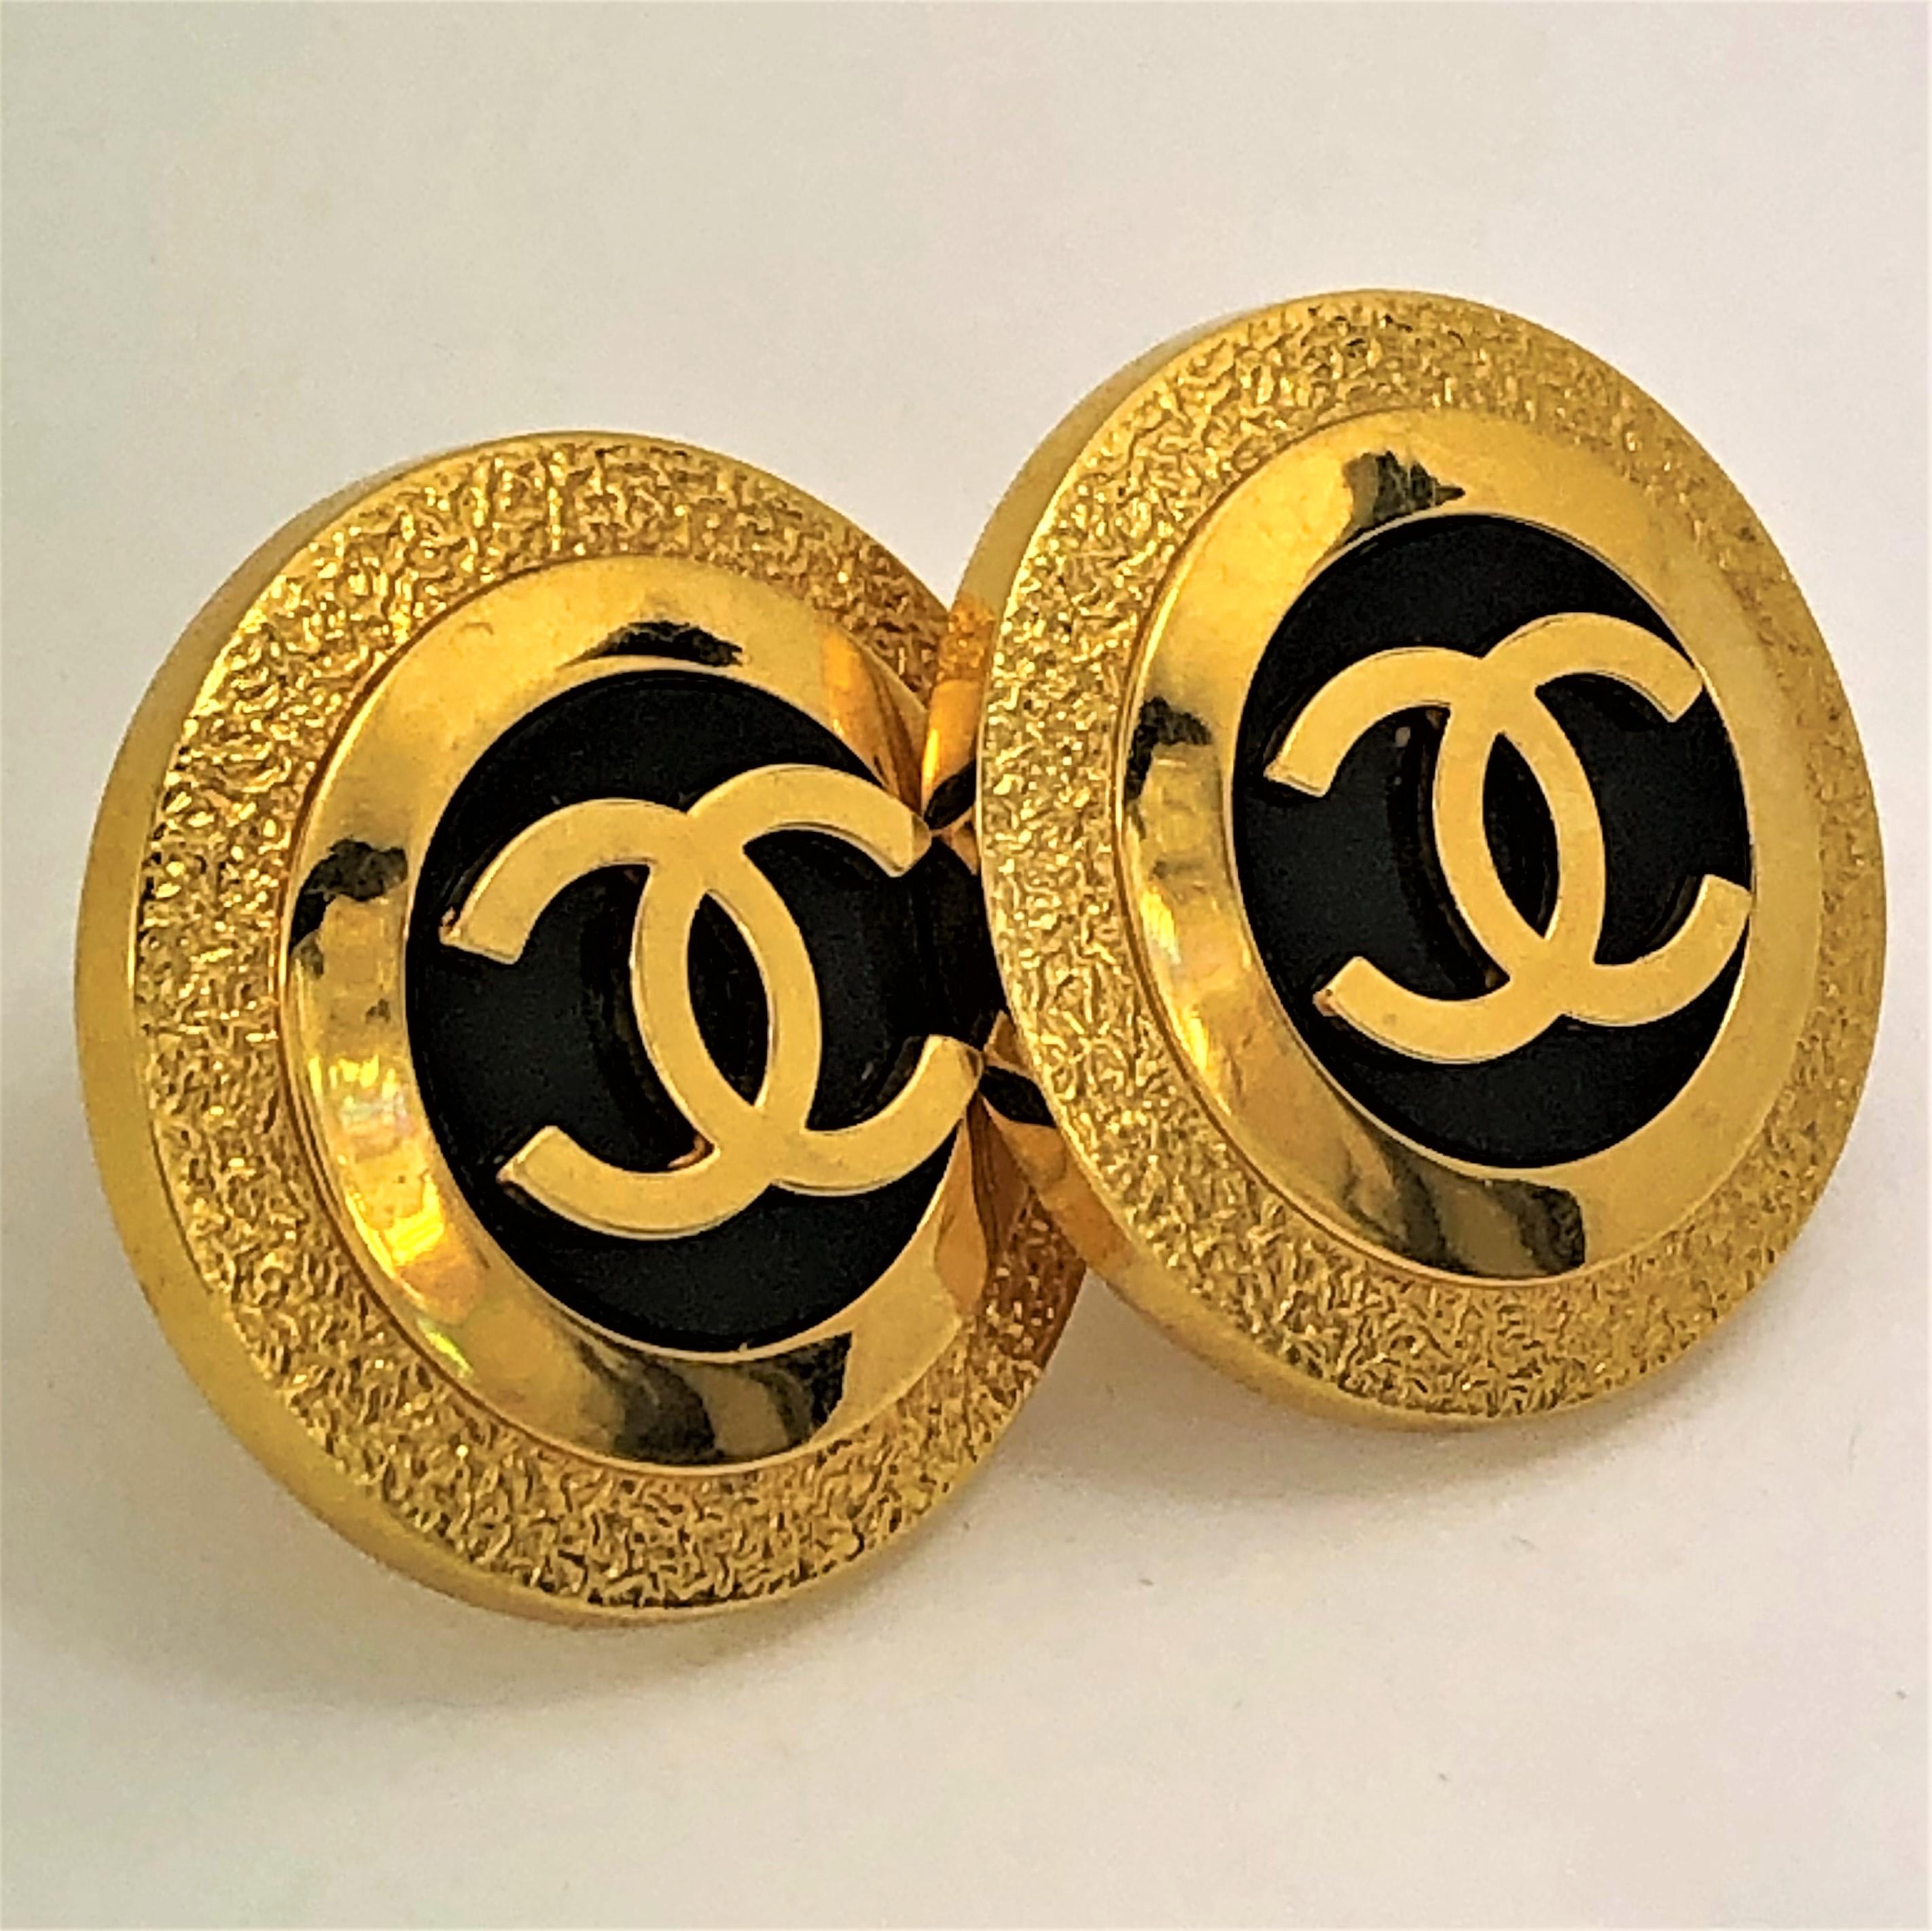 Large size ( 1.5 Inch diameter ) Vintage Gold Tone Chanel earrings with black resin
centers accented by large CC logos. Elegant for day or night use. Comfortable clip on 
backs with silicon pads. From the 1993 Spring collection. Marked Chanel 93 CC